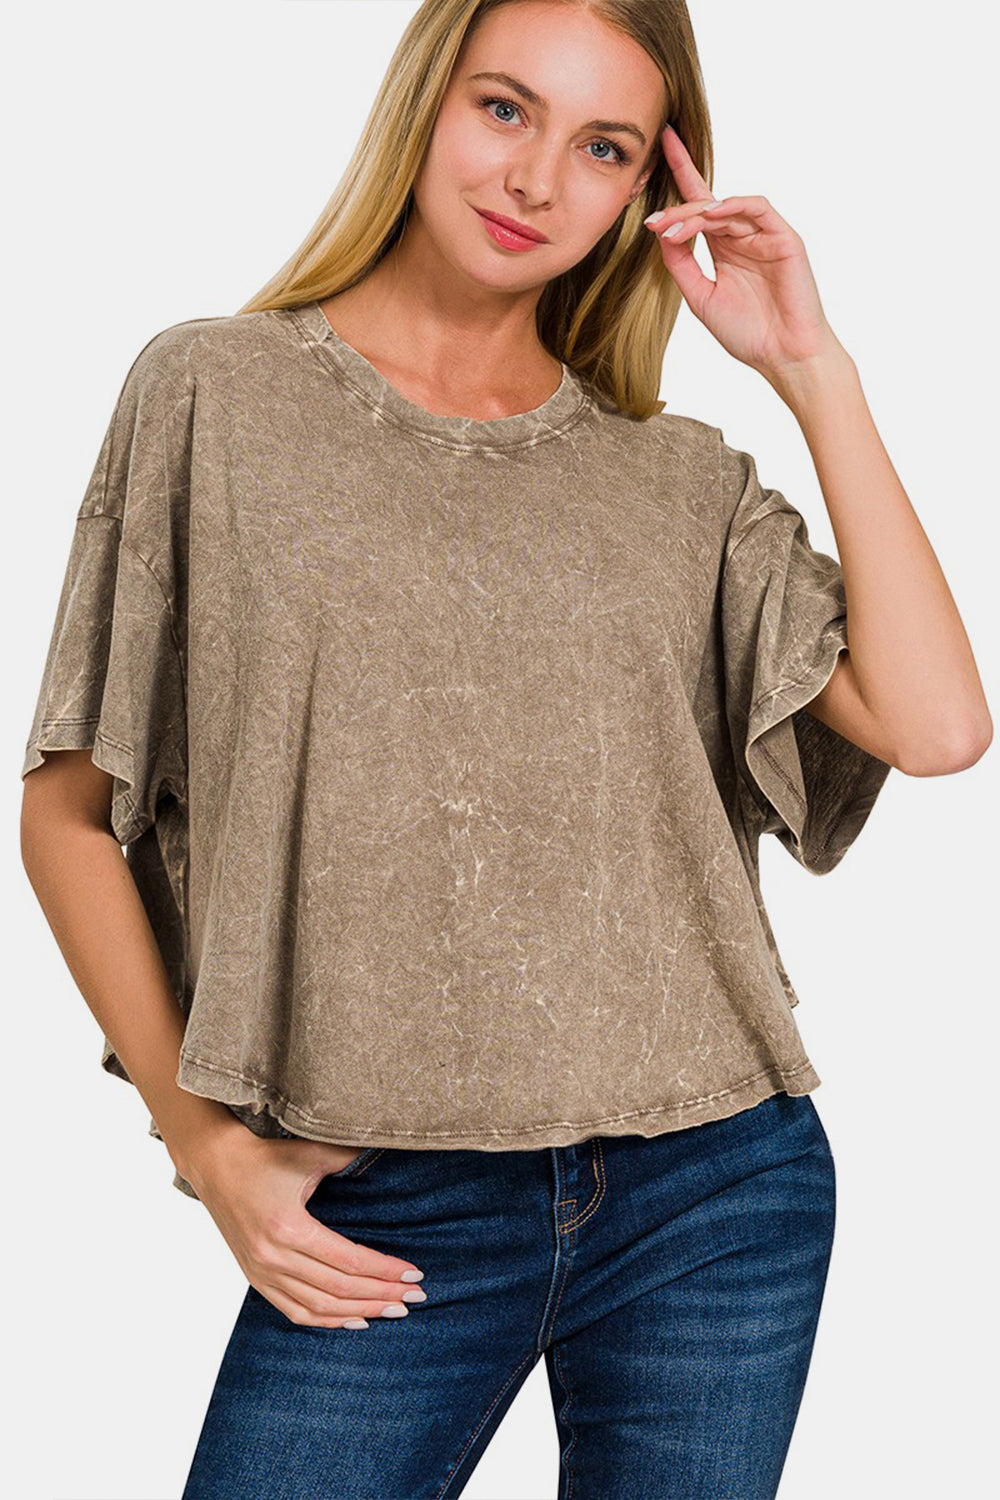 Casual Days - Mocha Washed Cotton Top - Joy & Country